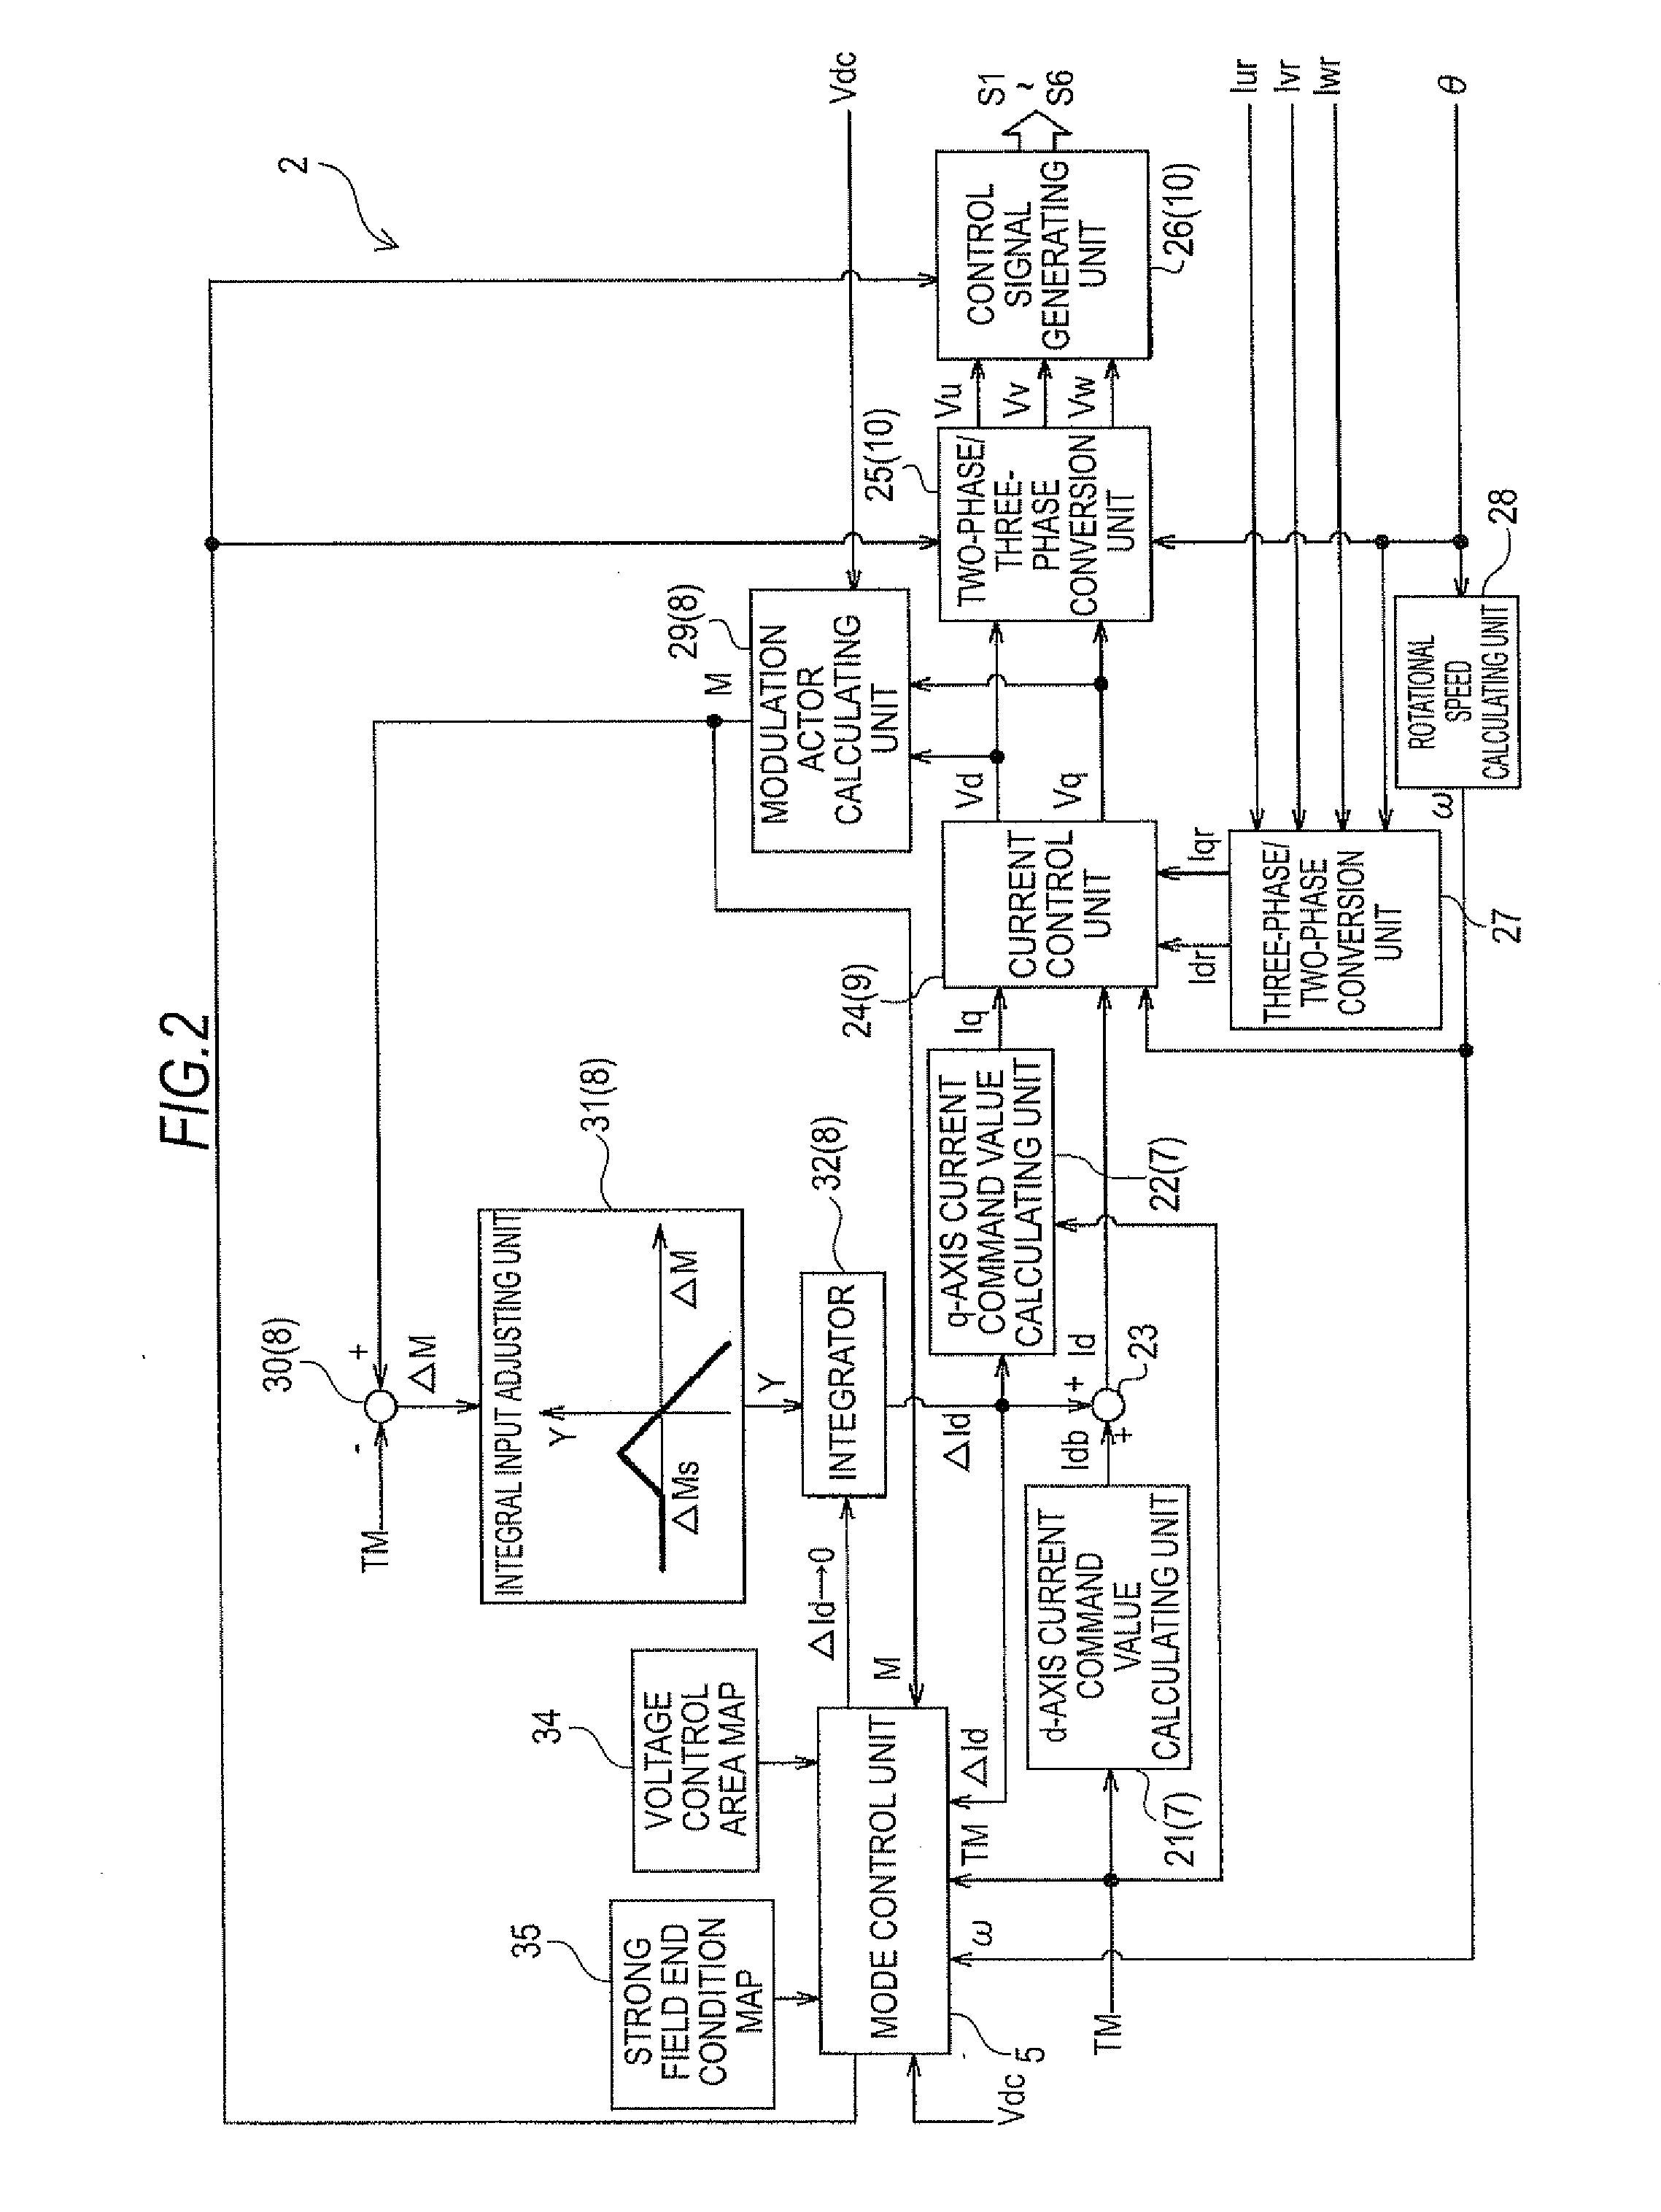 Control device of motor driving apparatus